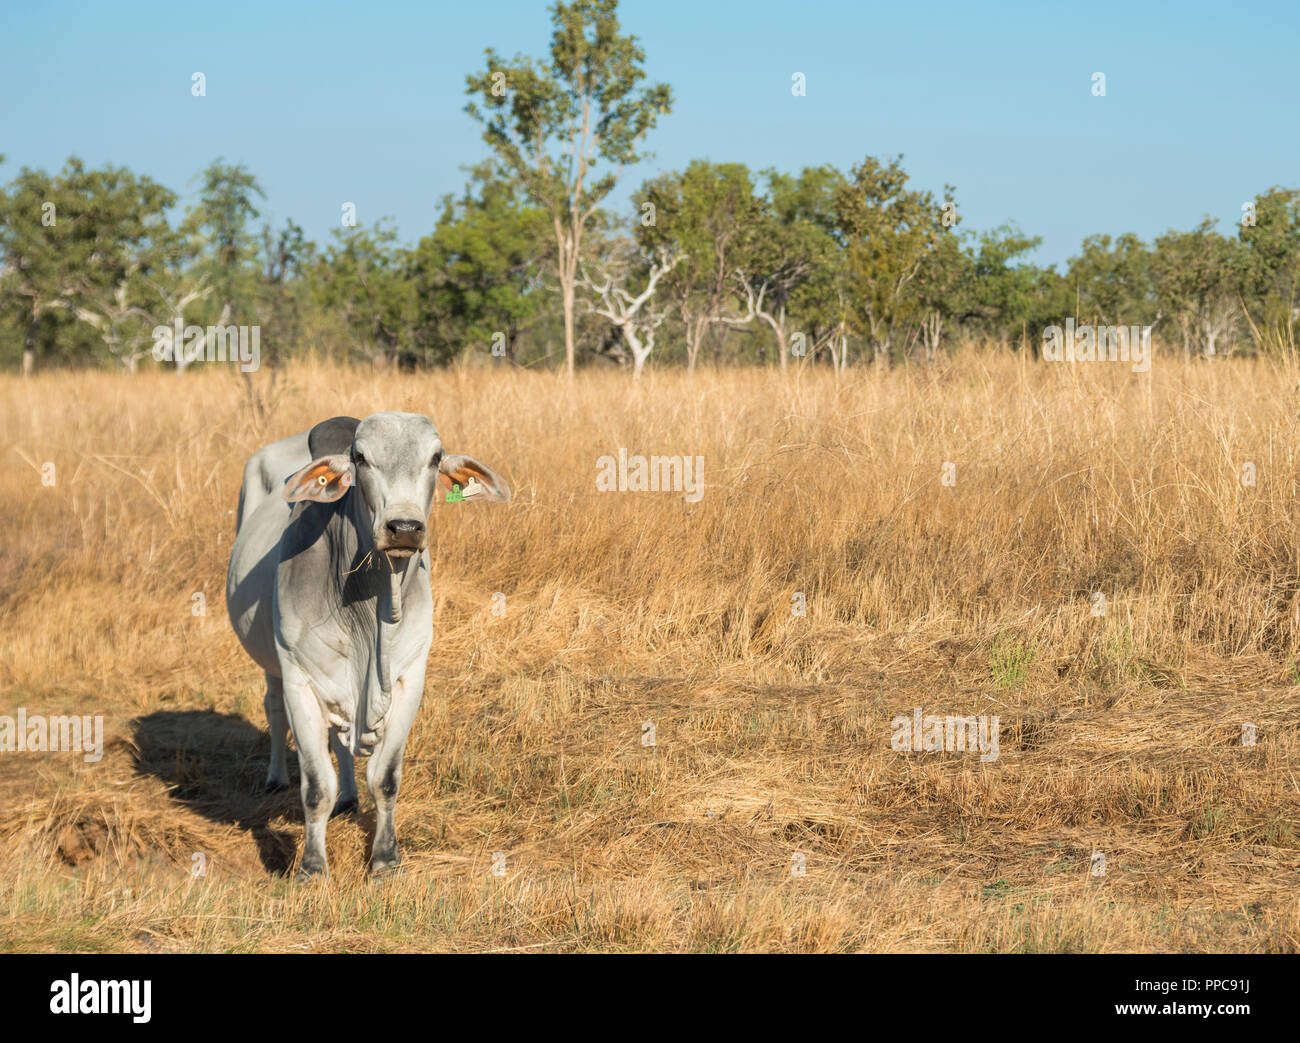 A Brahman cow staying in golden dry grass, NT, Australia Stock Photo